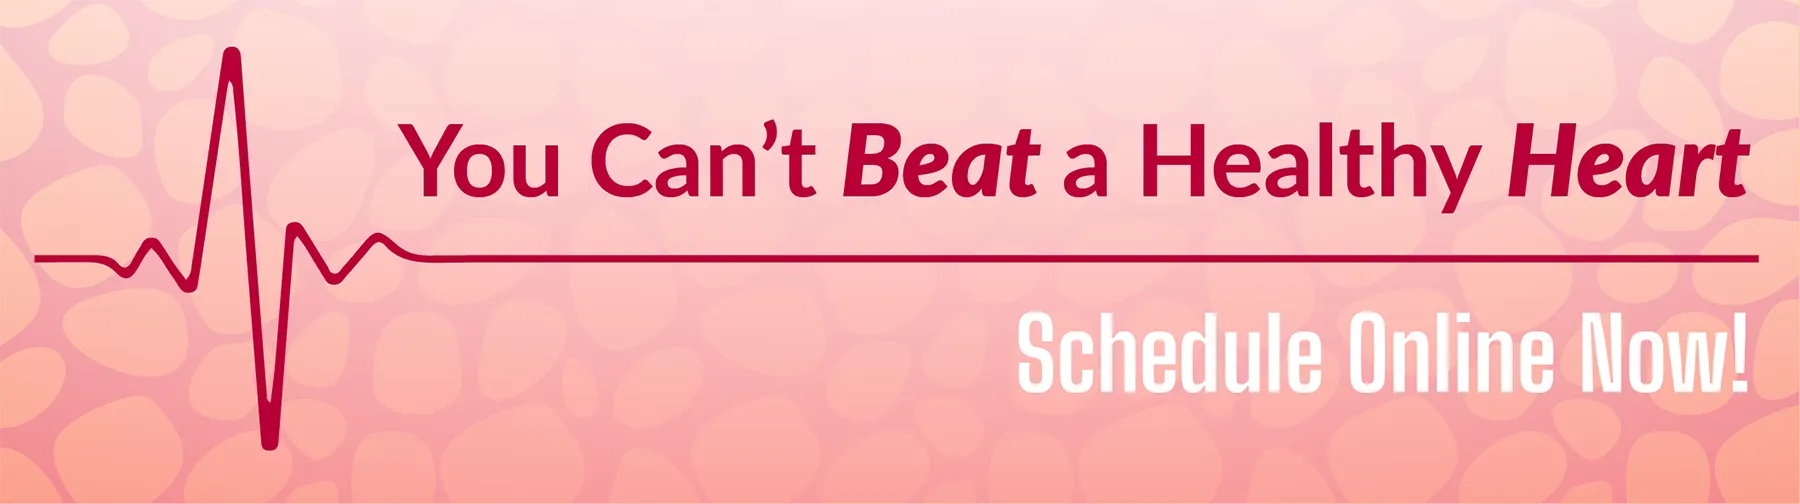  You can't beat a healthy heart! Schedule Online Now!